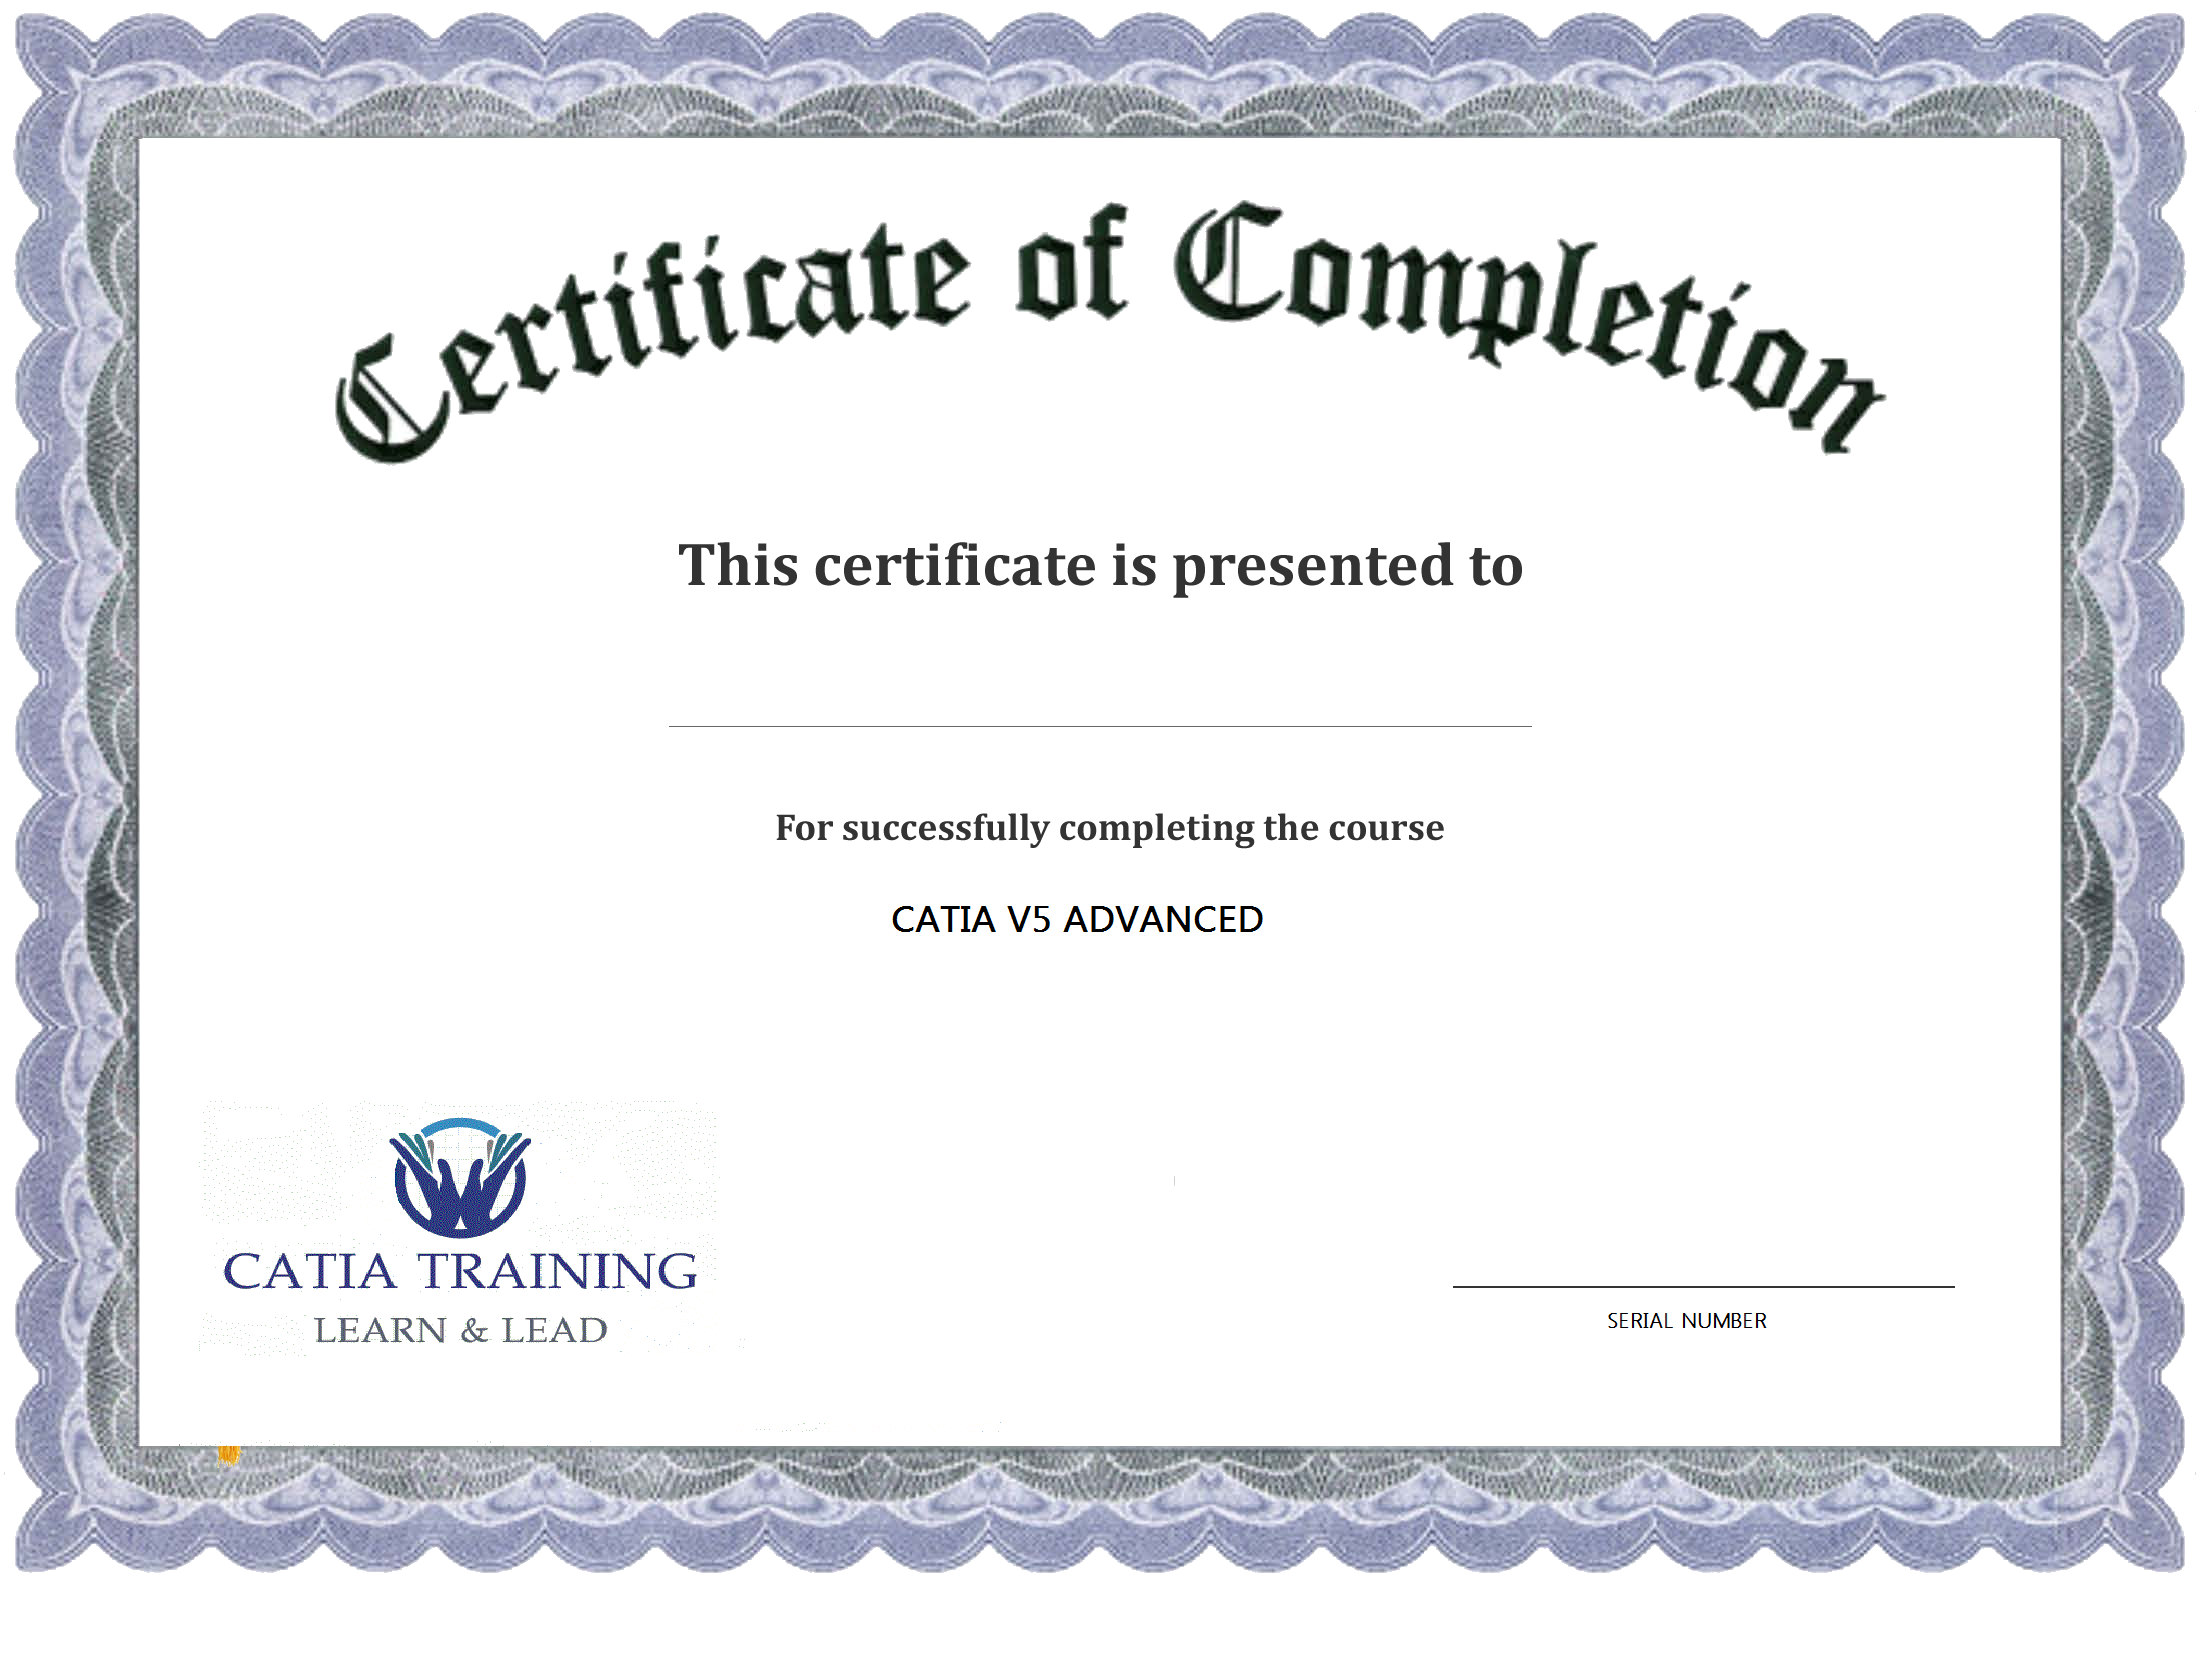 20 Certificate Of Completion Templates Free Download Images - Free Intended For Free Completion Certificate Templates For Word